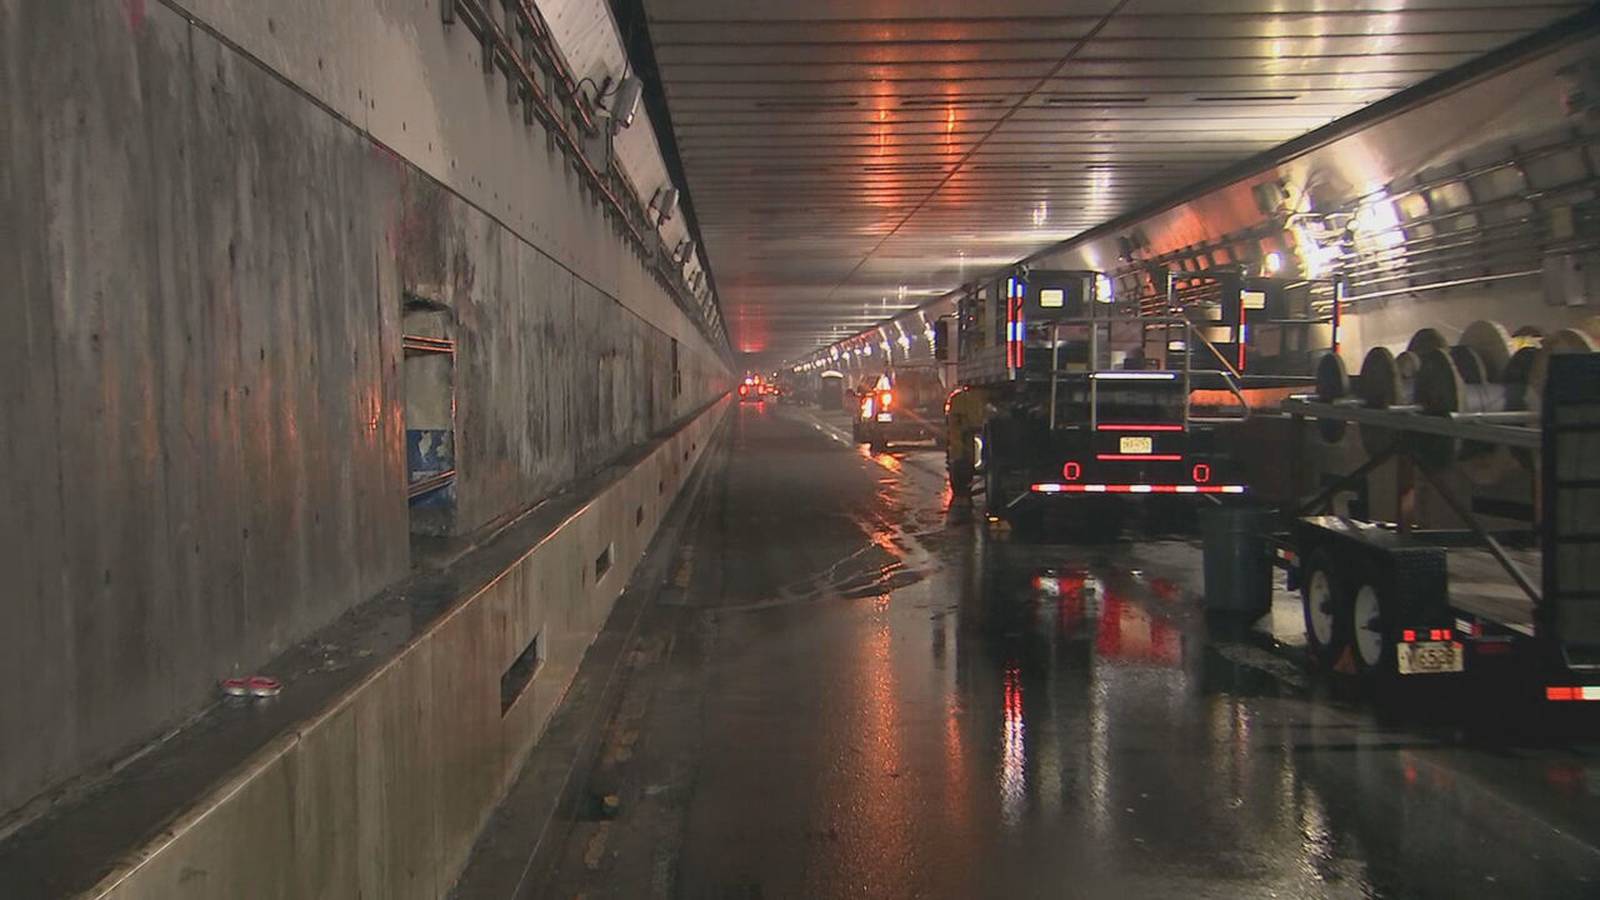 Behindthescenes look at construction inside Sumner Tunnel as 8week